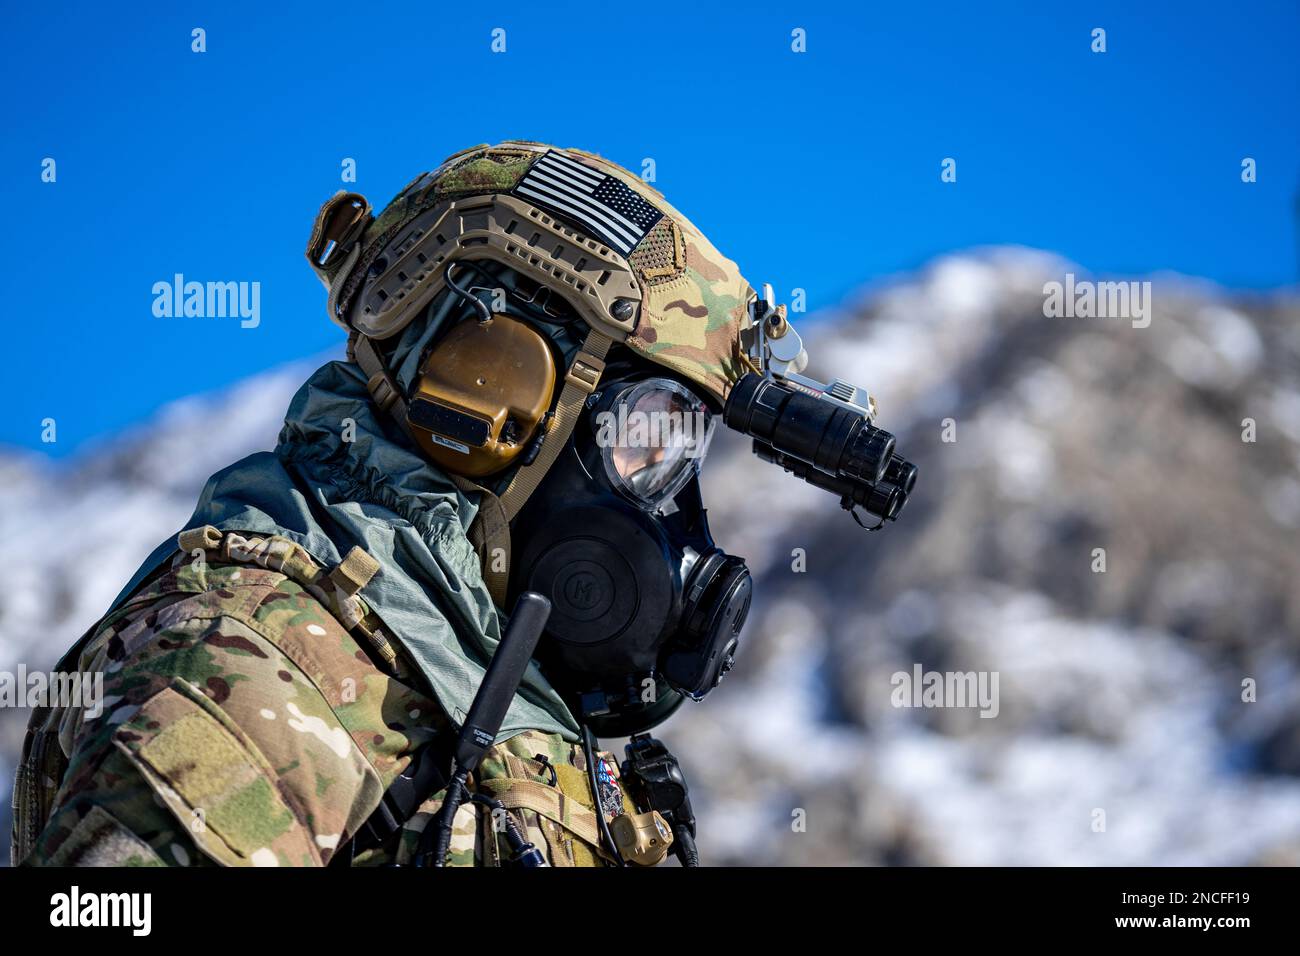 A Soldier assigned to the 56th Chemical Reconnaissance Detachment (CRD), 4th Battalion, 5th Special Forces Group (Airborne), prepares to conduct sensitive site exploitation training as part of a 1st Special Forces Command external evaluation exercise in Dugway, Utah, Jan. 31, 2023. The exercise, providing realistic mission training, evaluates CRD’s technical and tactical skillsets to deploy to combat environments. (U.S. Army photo by Staff Sgt. Gregory T. Summers, 5th Special Forces Group (Airborne) Public Affairs) Stock Photo